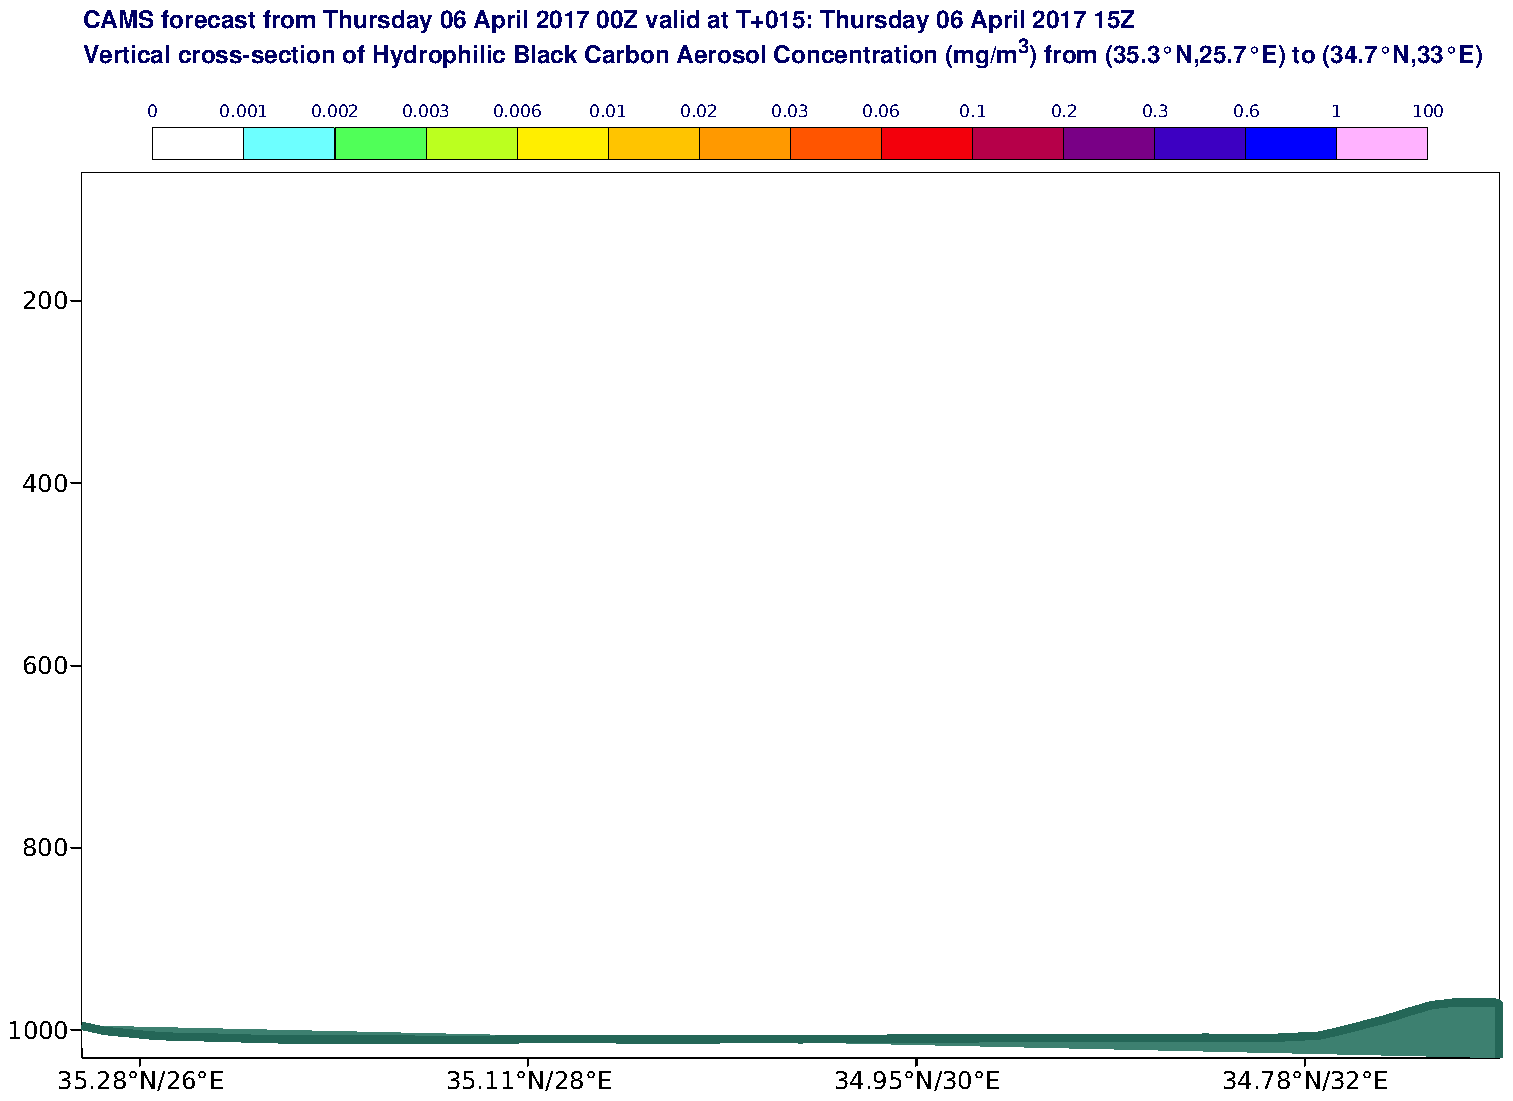 Vertical cross-section of Hydrophilic Black Carbon Aerosol Concentration (mg/m3) valid at T15 - 2017-04-06 15:00